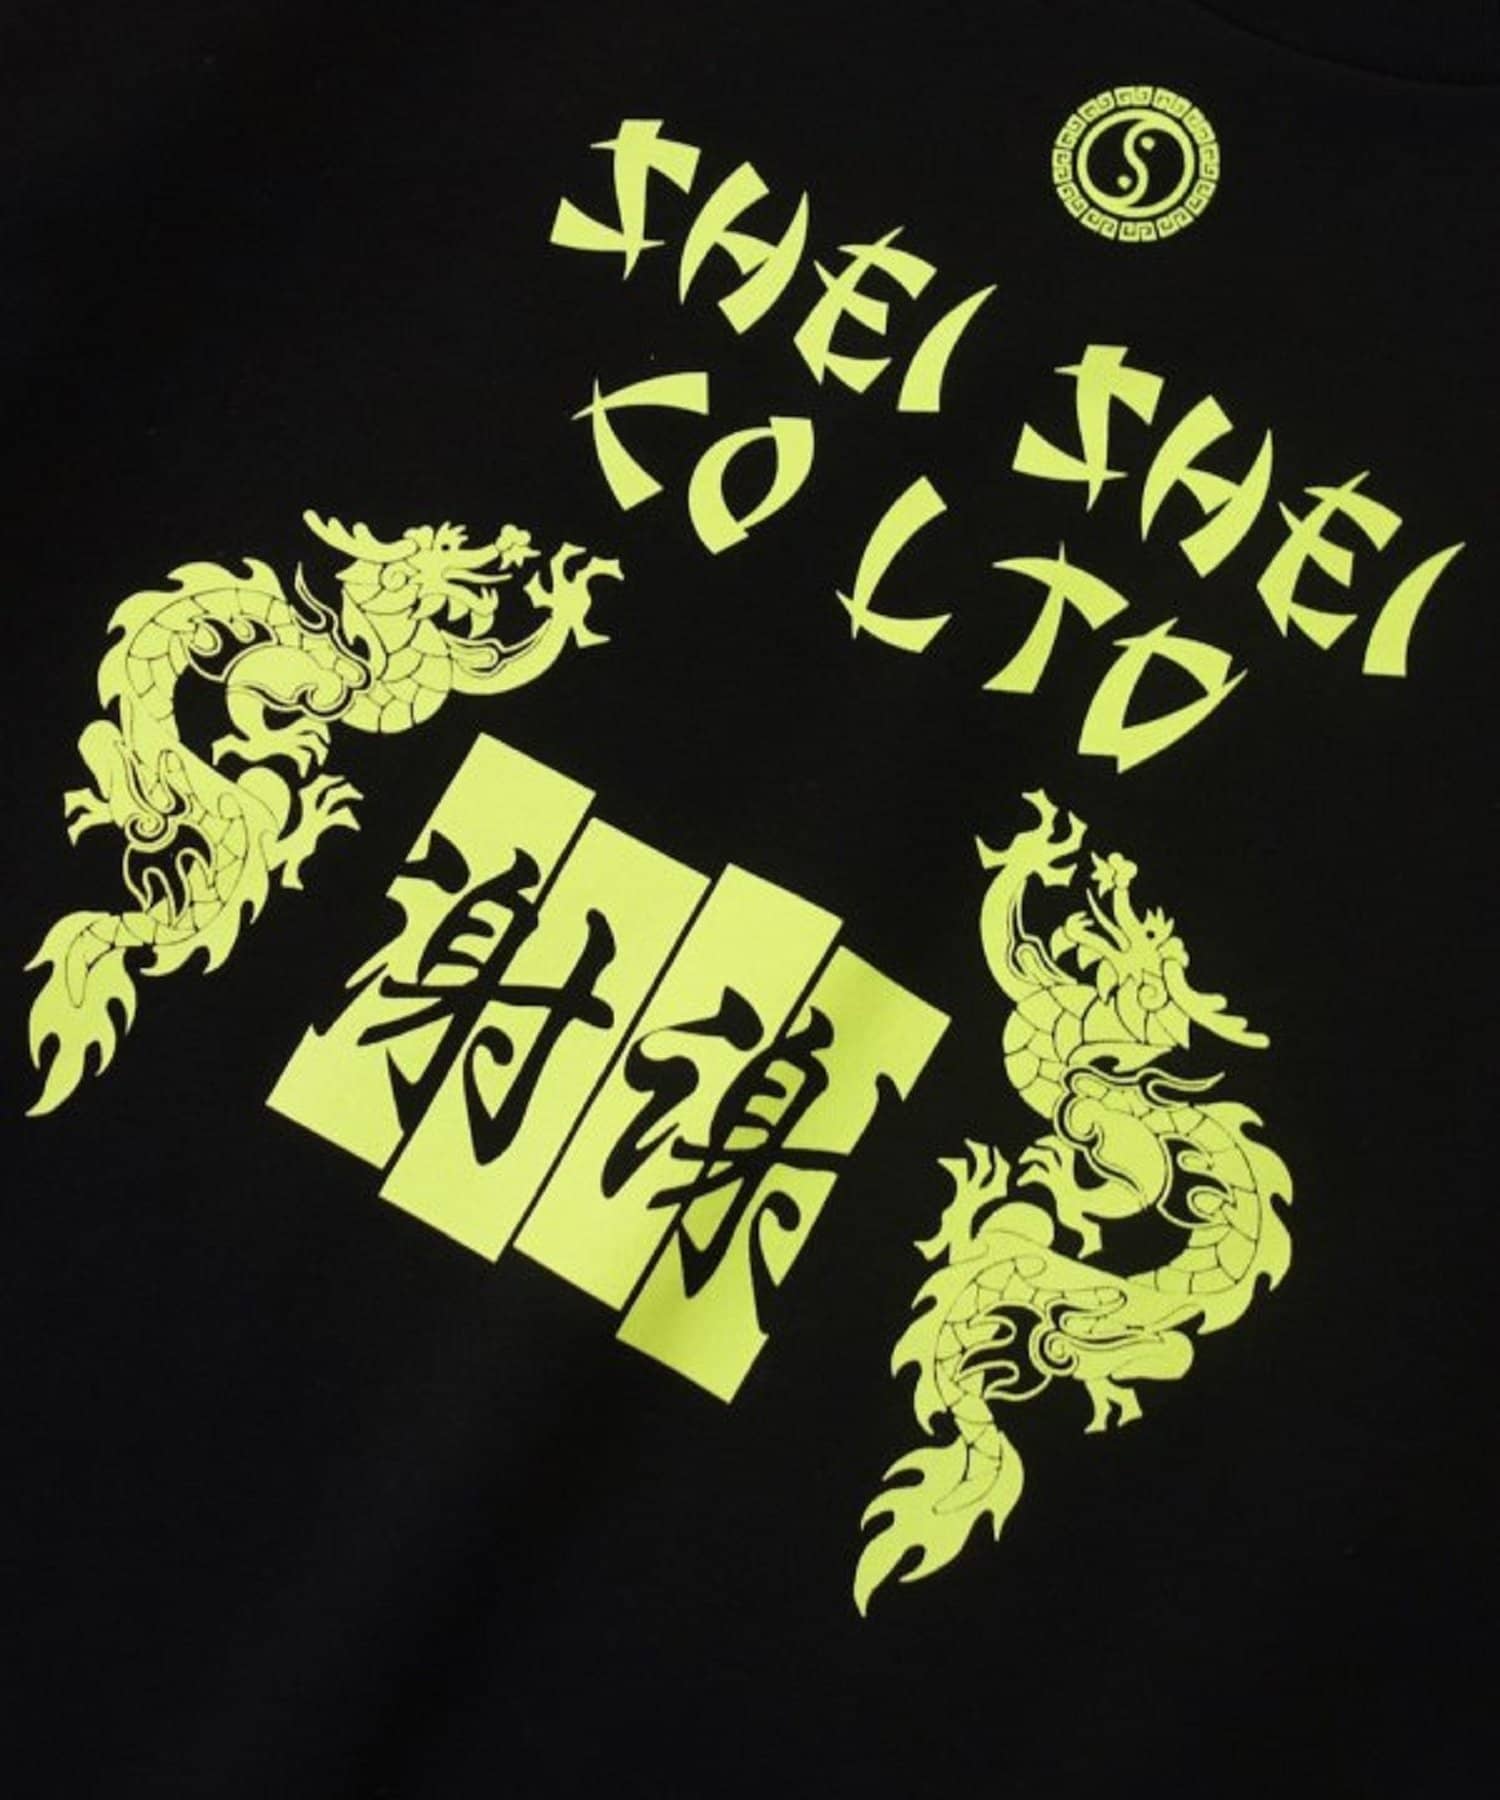 WHO’S WHO gallery(フーズフーギャラリー) 【SHEI SHEI/シェイシェイ】DRAGON L/S TEE